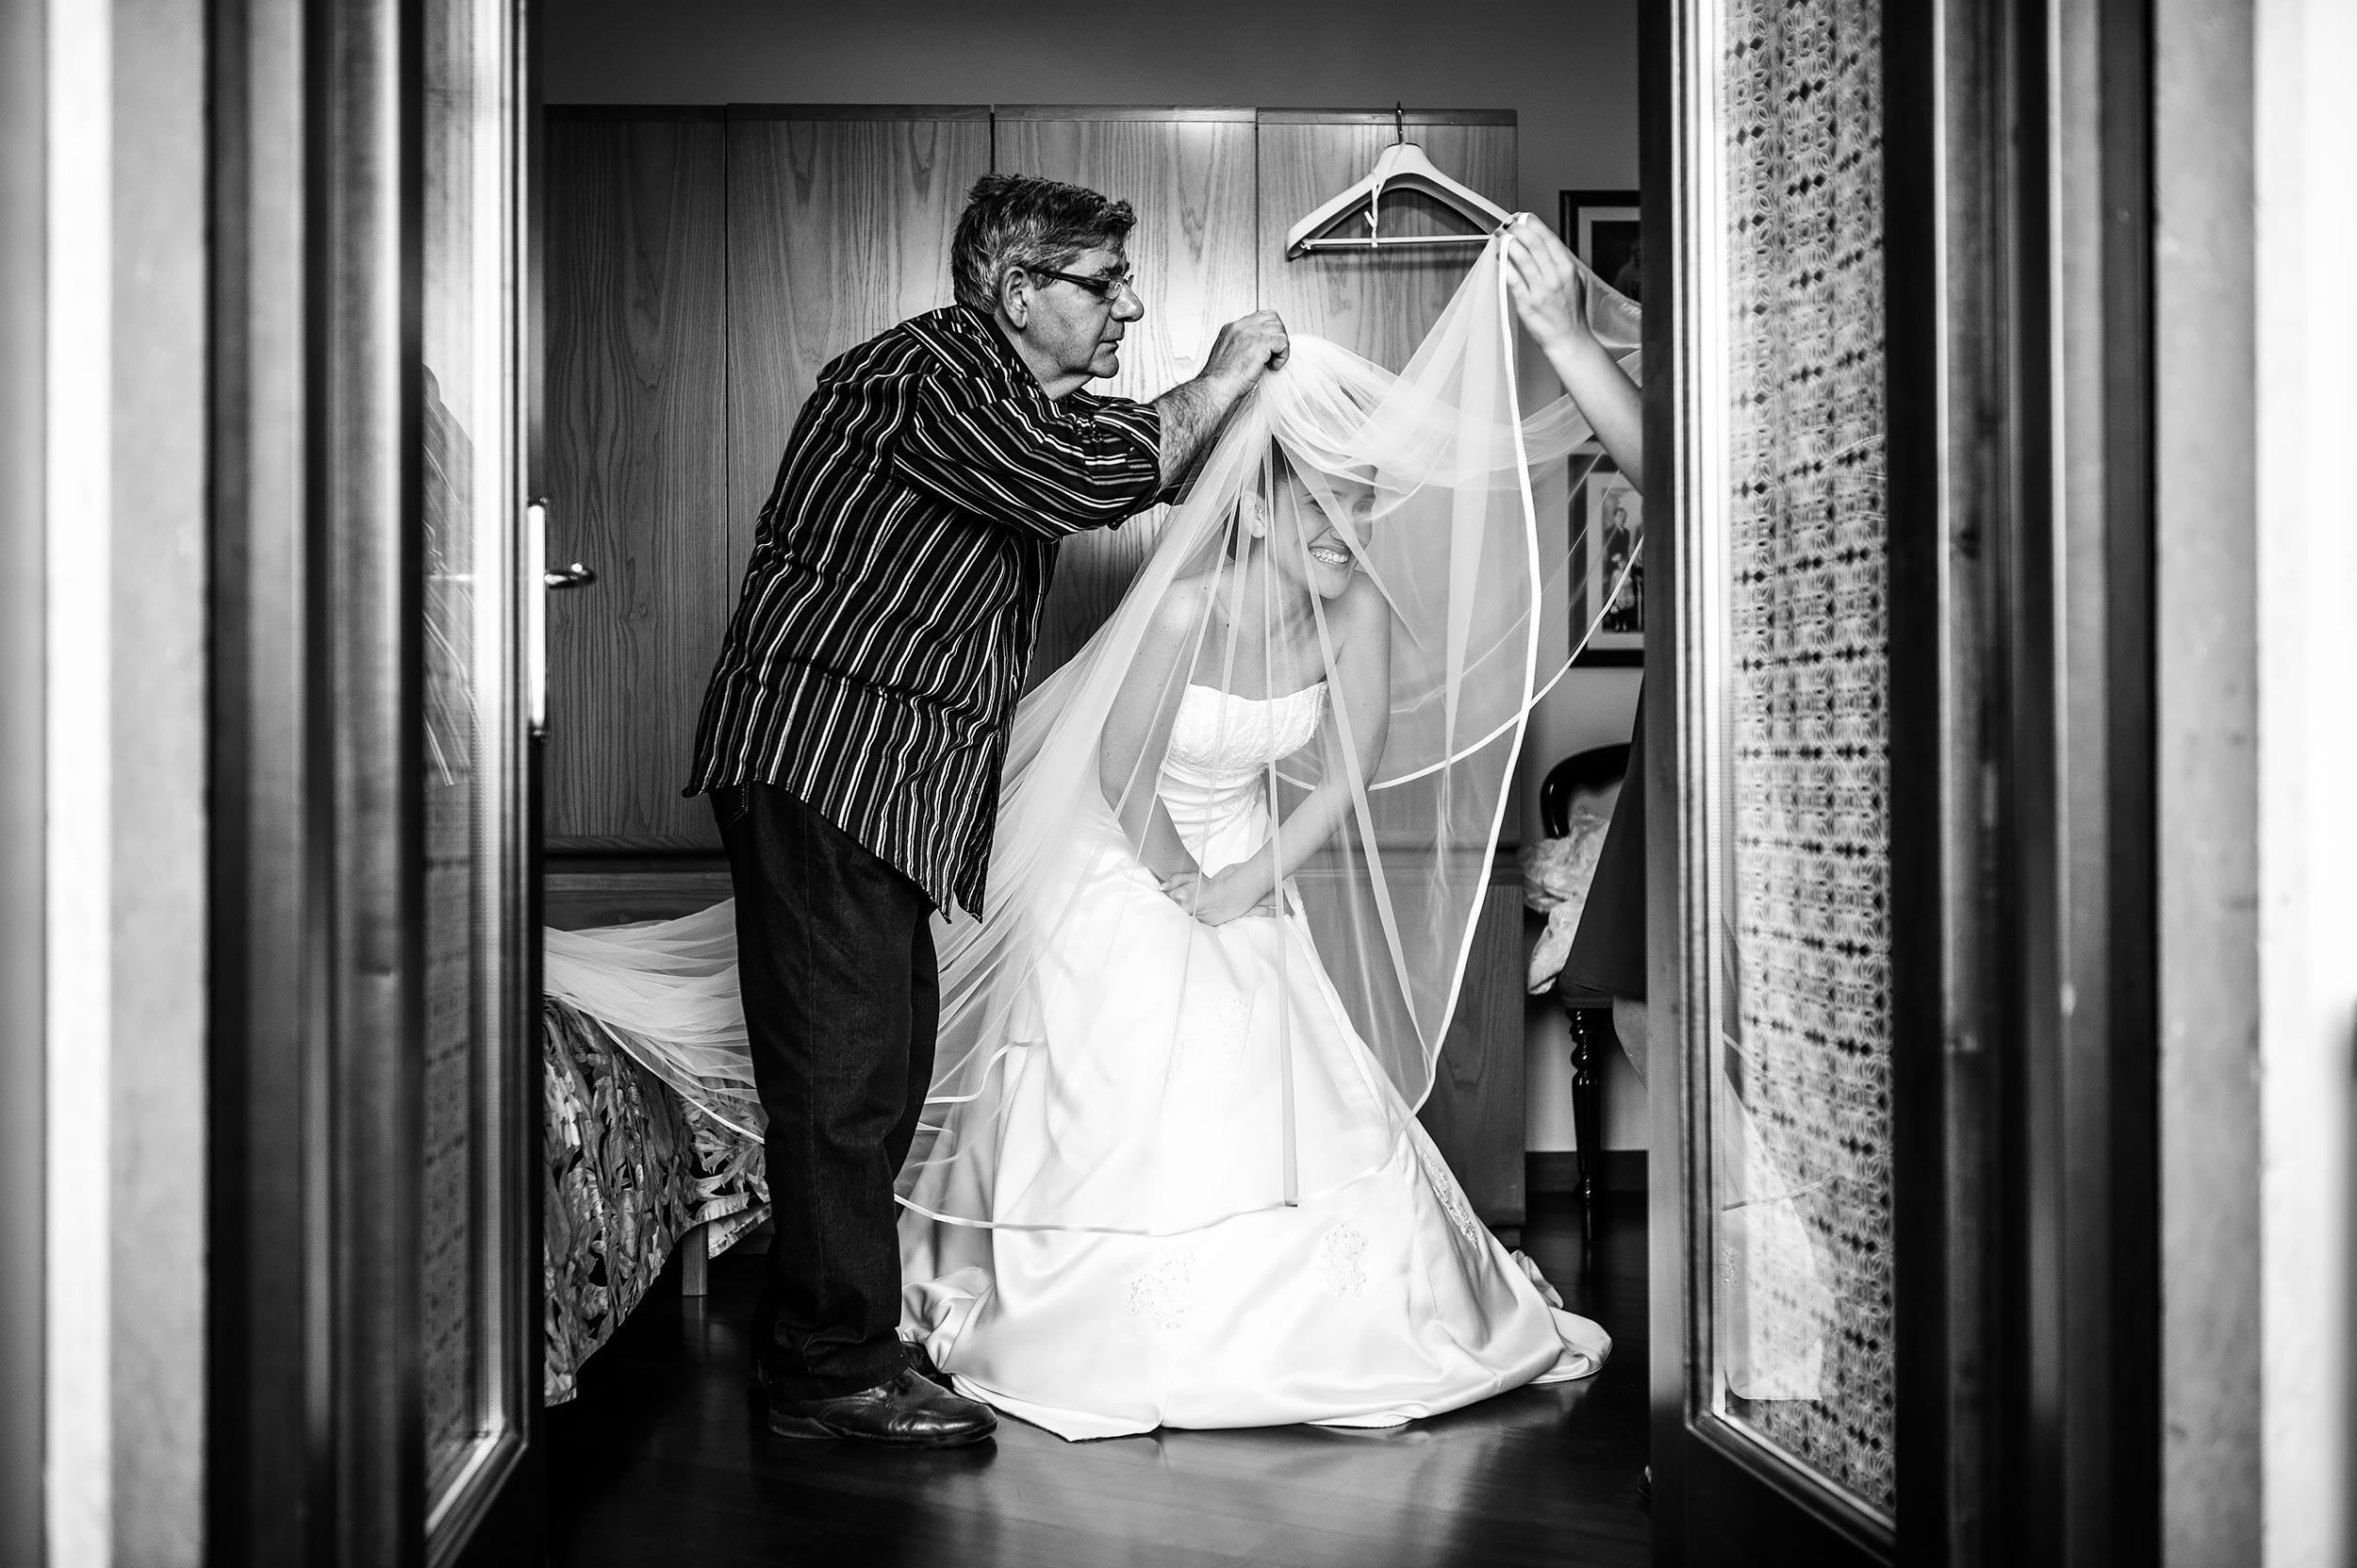 bride-getting-ready-helped-by-a-man-putting-the-veil-on-black-and-white-wedding-photography.jpg